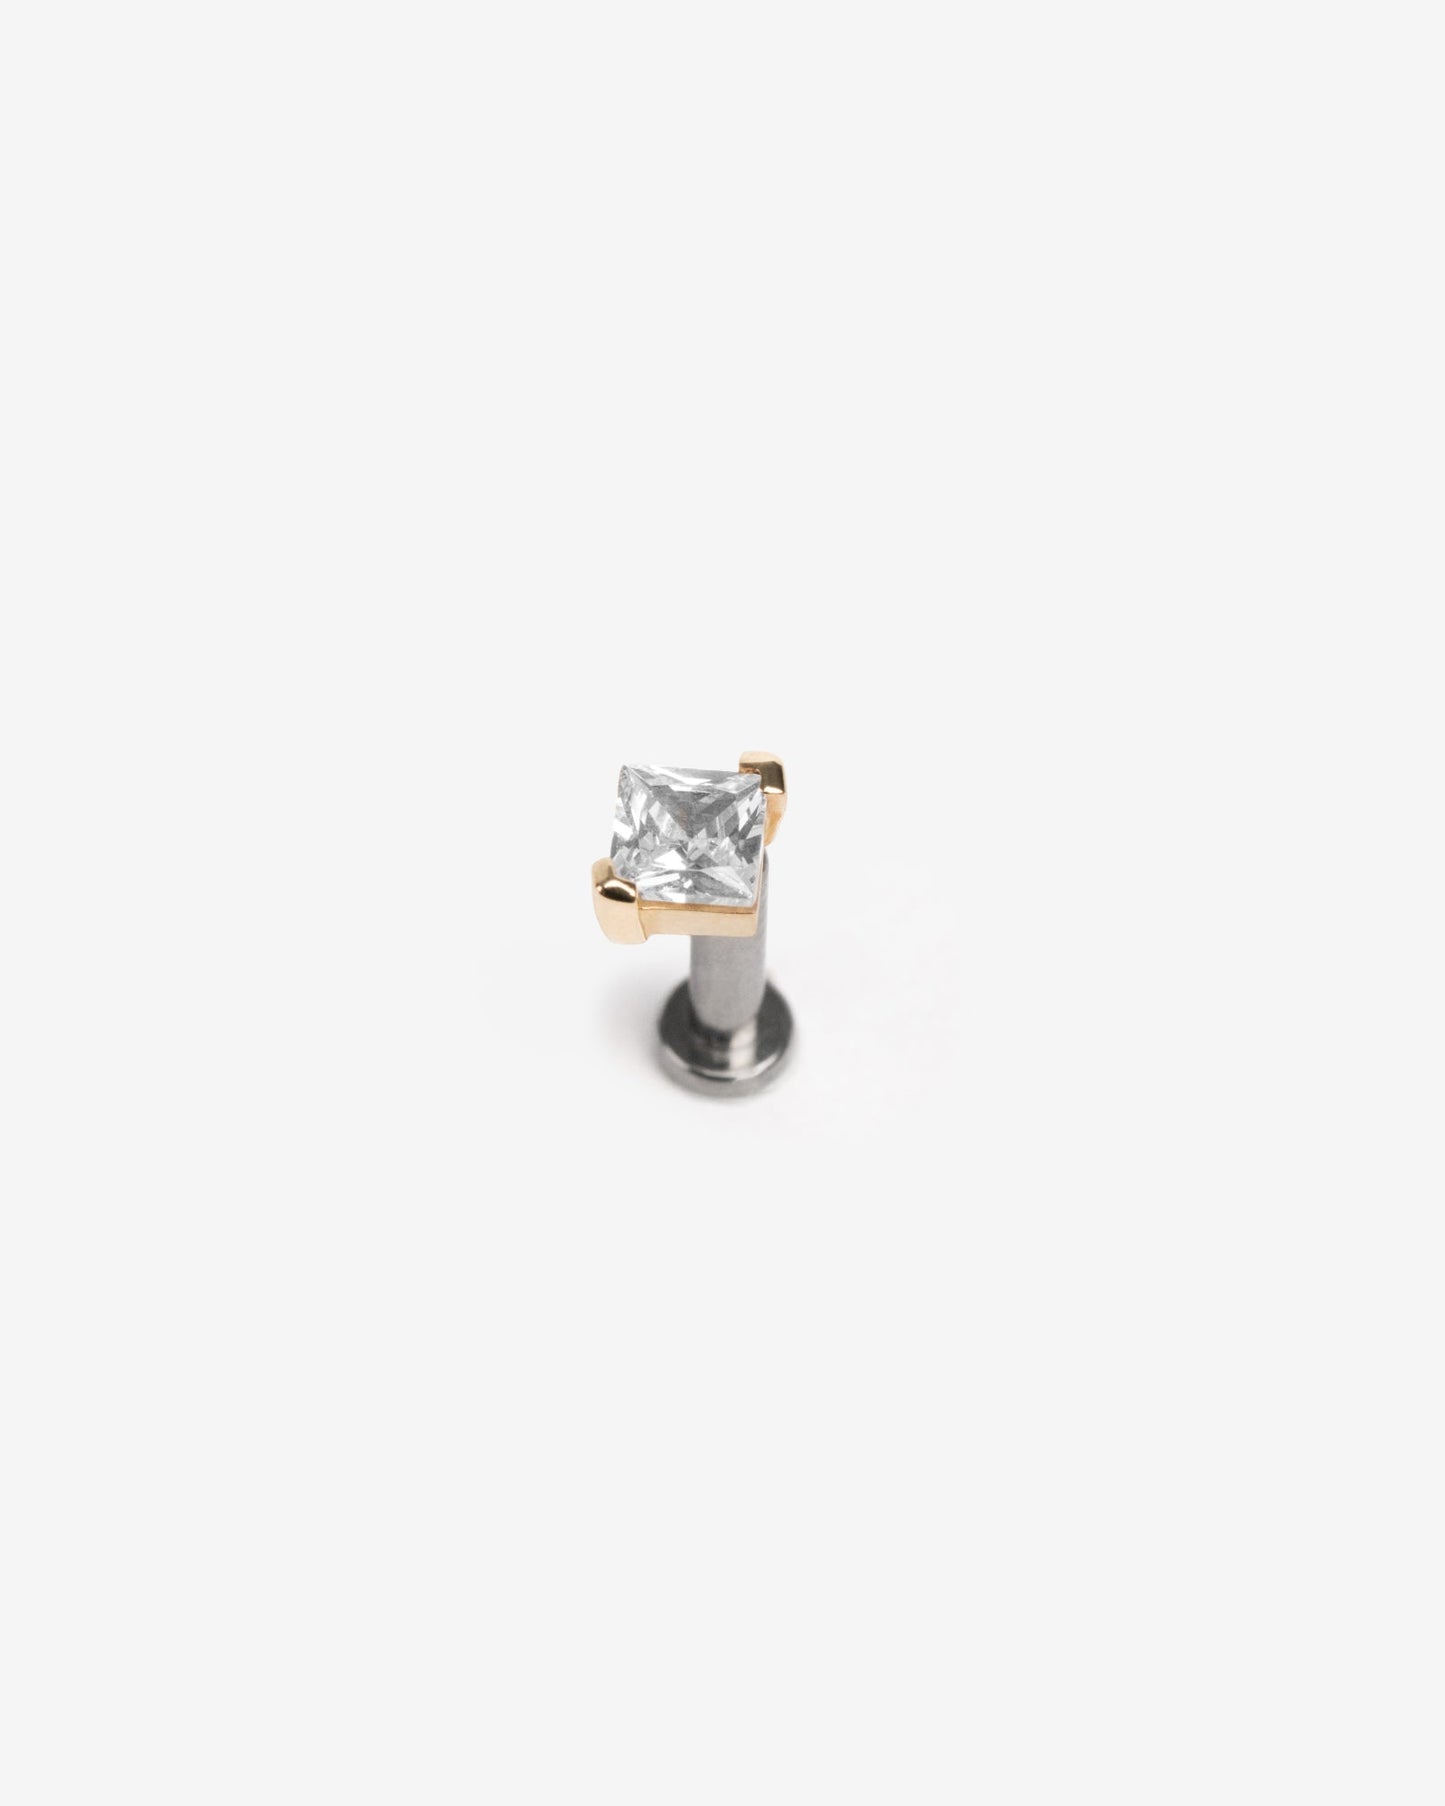 Dhara Threadless End (14K Gold) - Ends - Ask and Embla